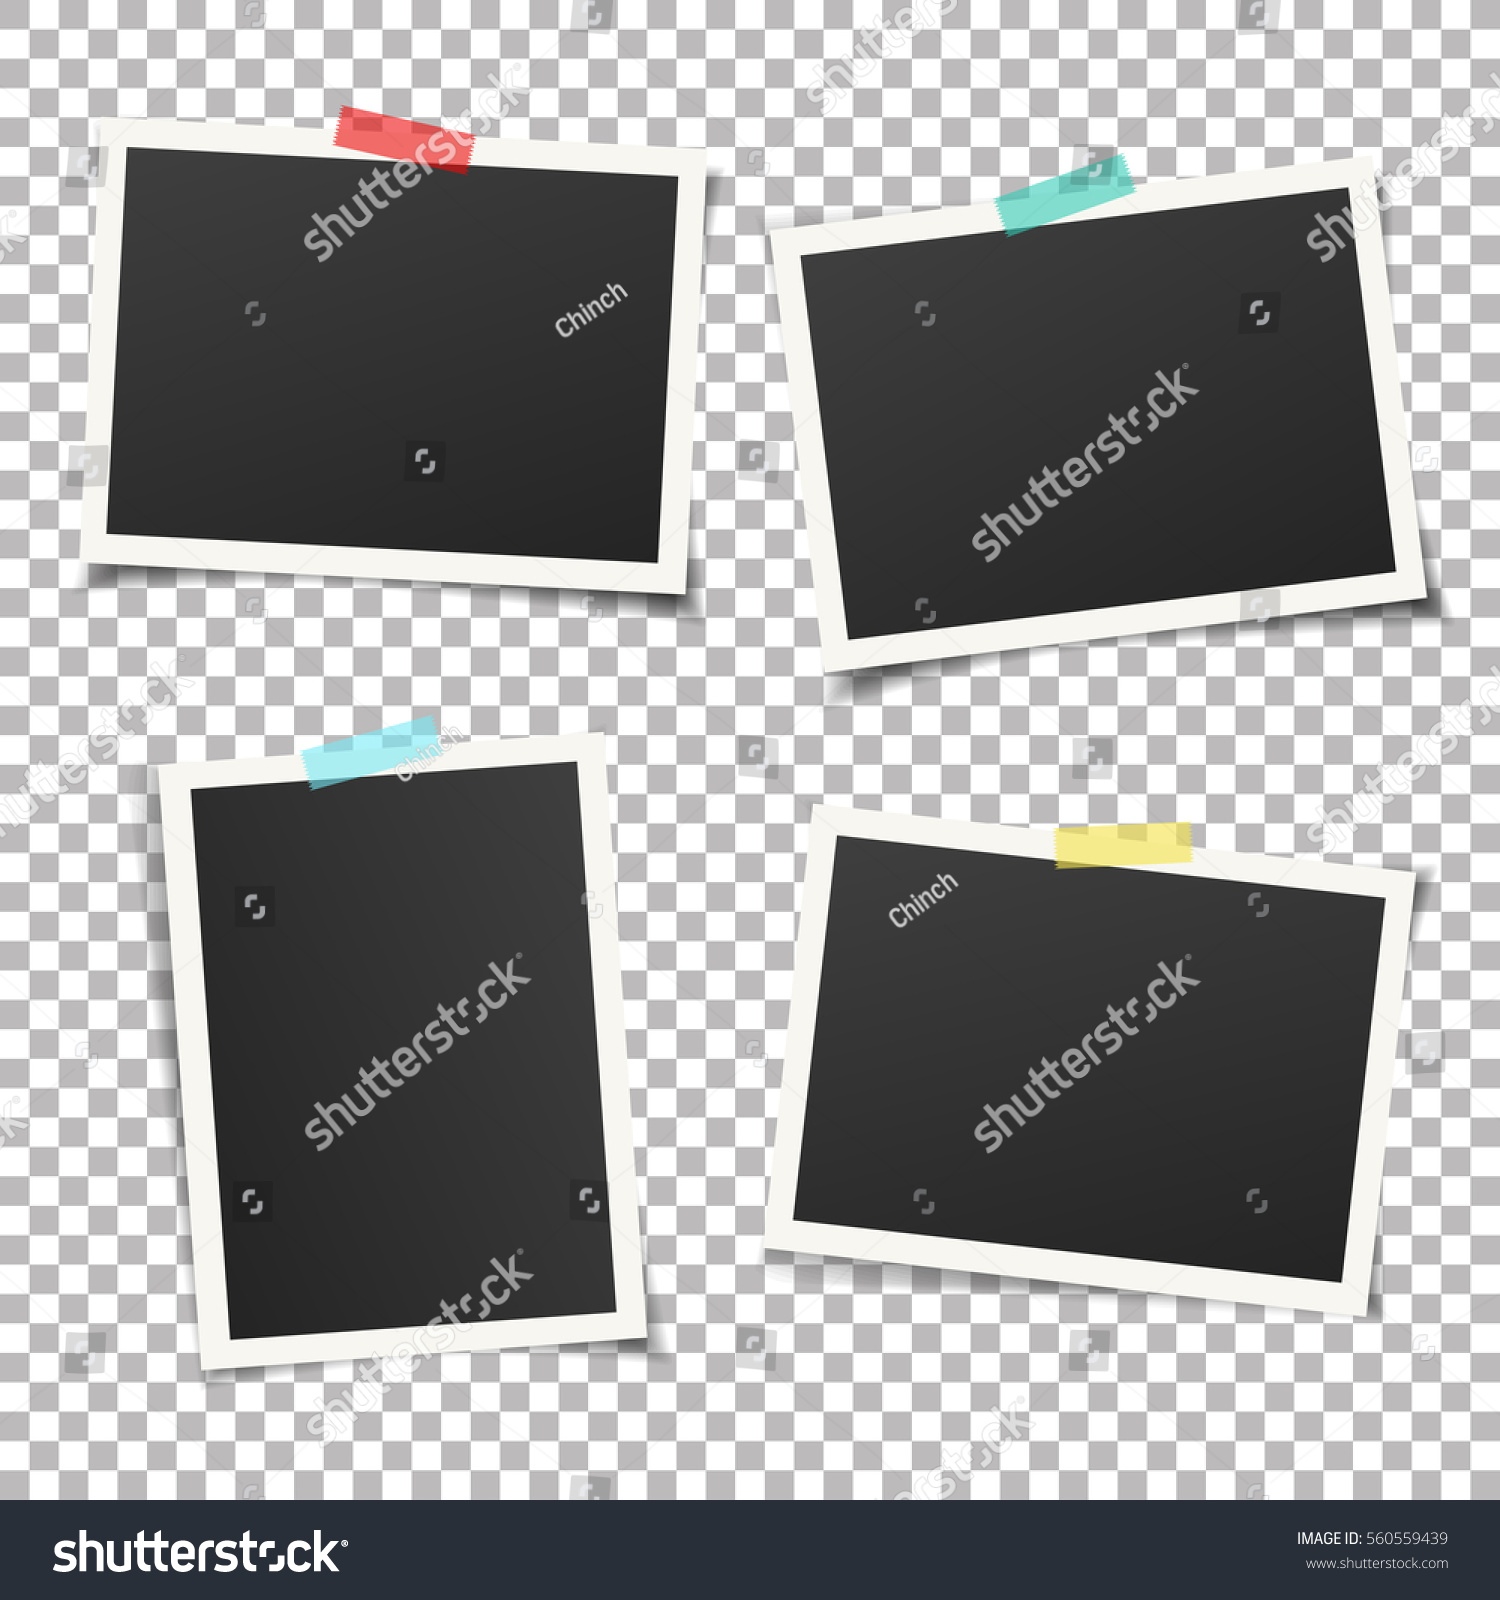 Set of vintage photo frame with adhesive tape. Vintage style.  Vector illustration with adhesive tapes. Photo realistic Vector EPS10 Mockups. Retro Photo Frame Template for your photos. #560559439